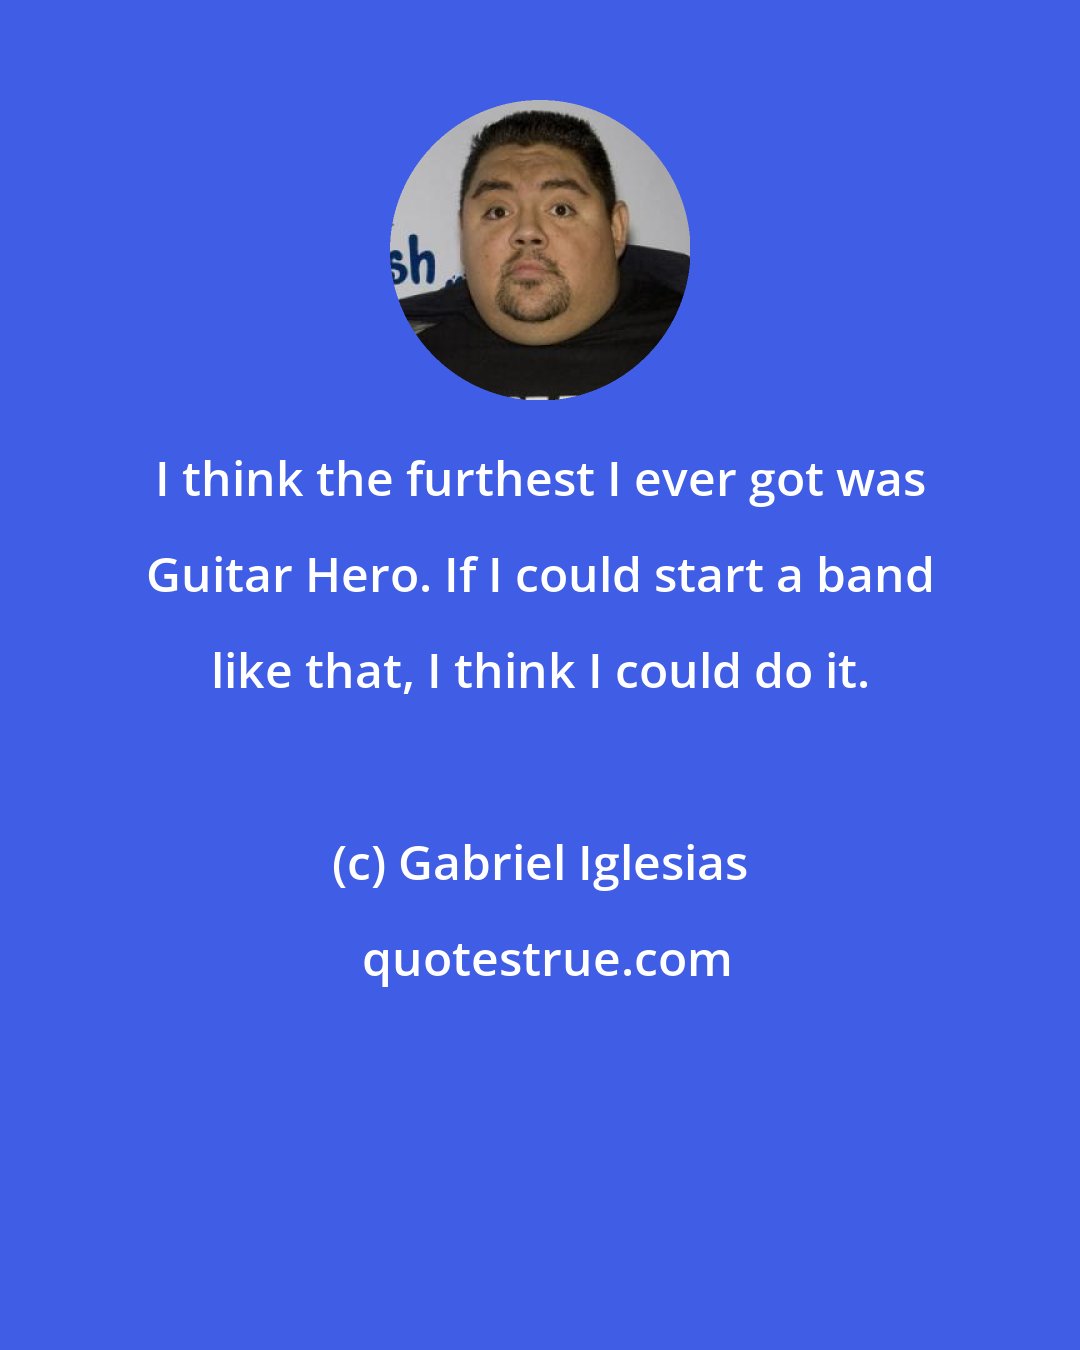 Gabriel Iglesias: I think the furthest I ever got was Guitar Hero. If I could start a band like that, I think I could do it.